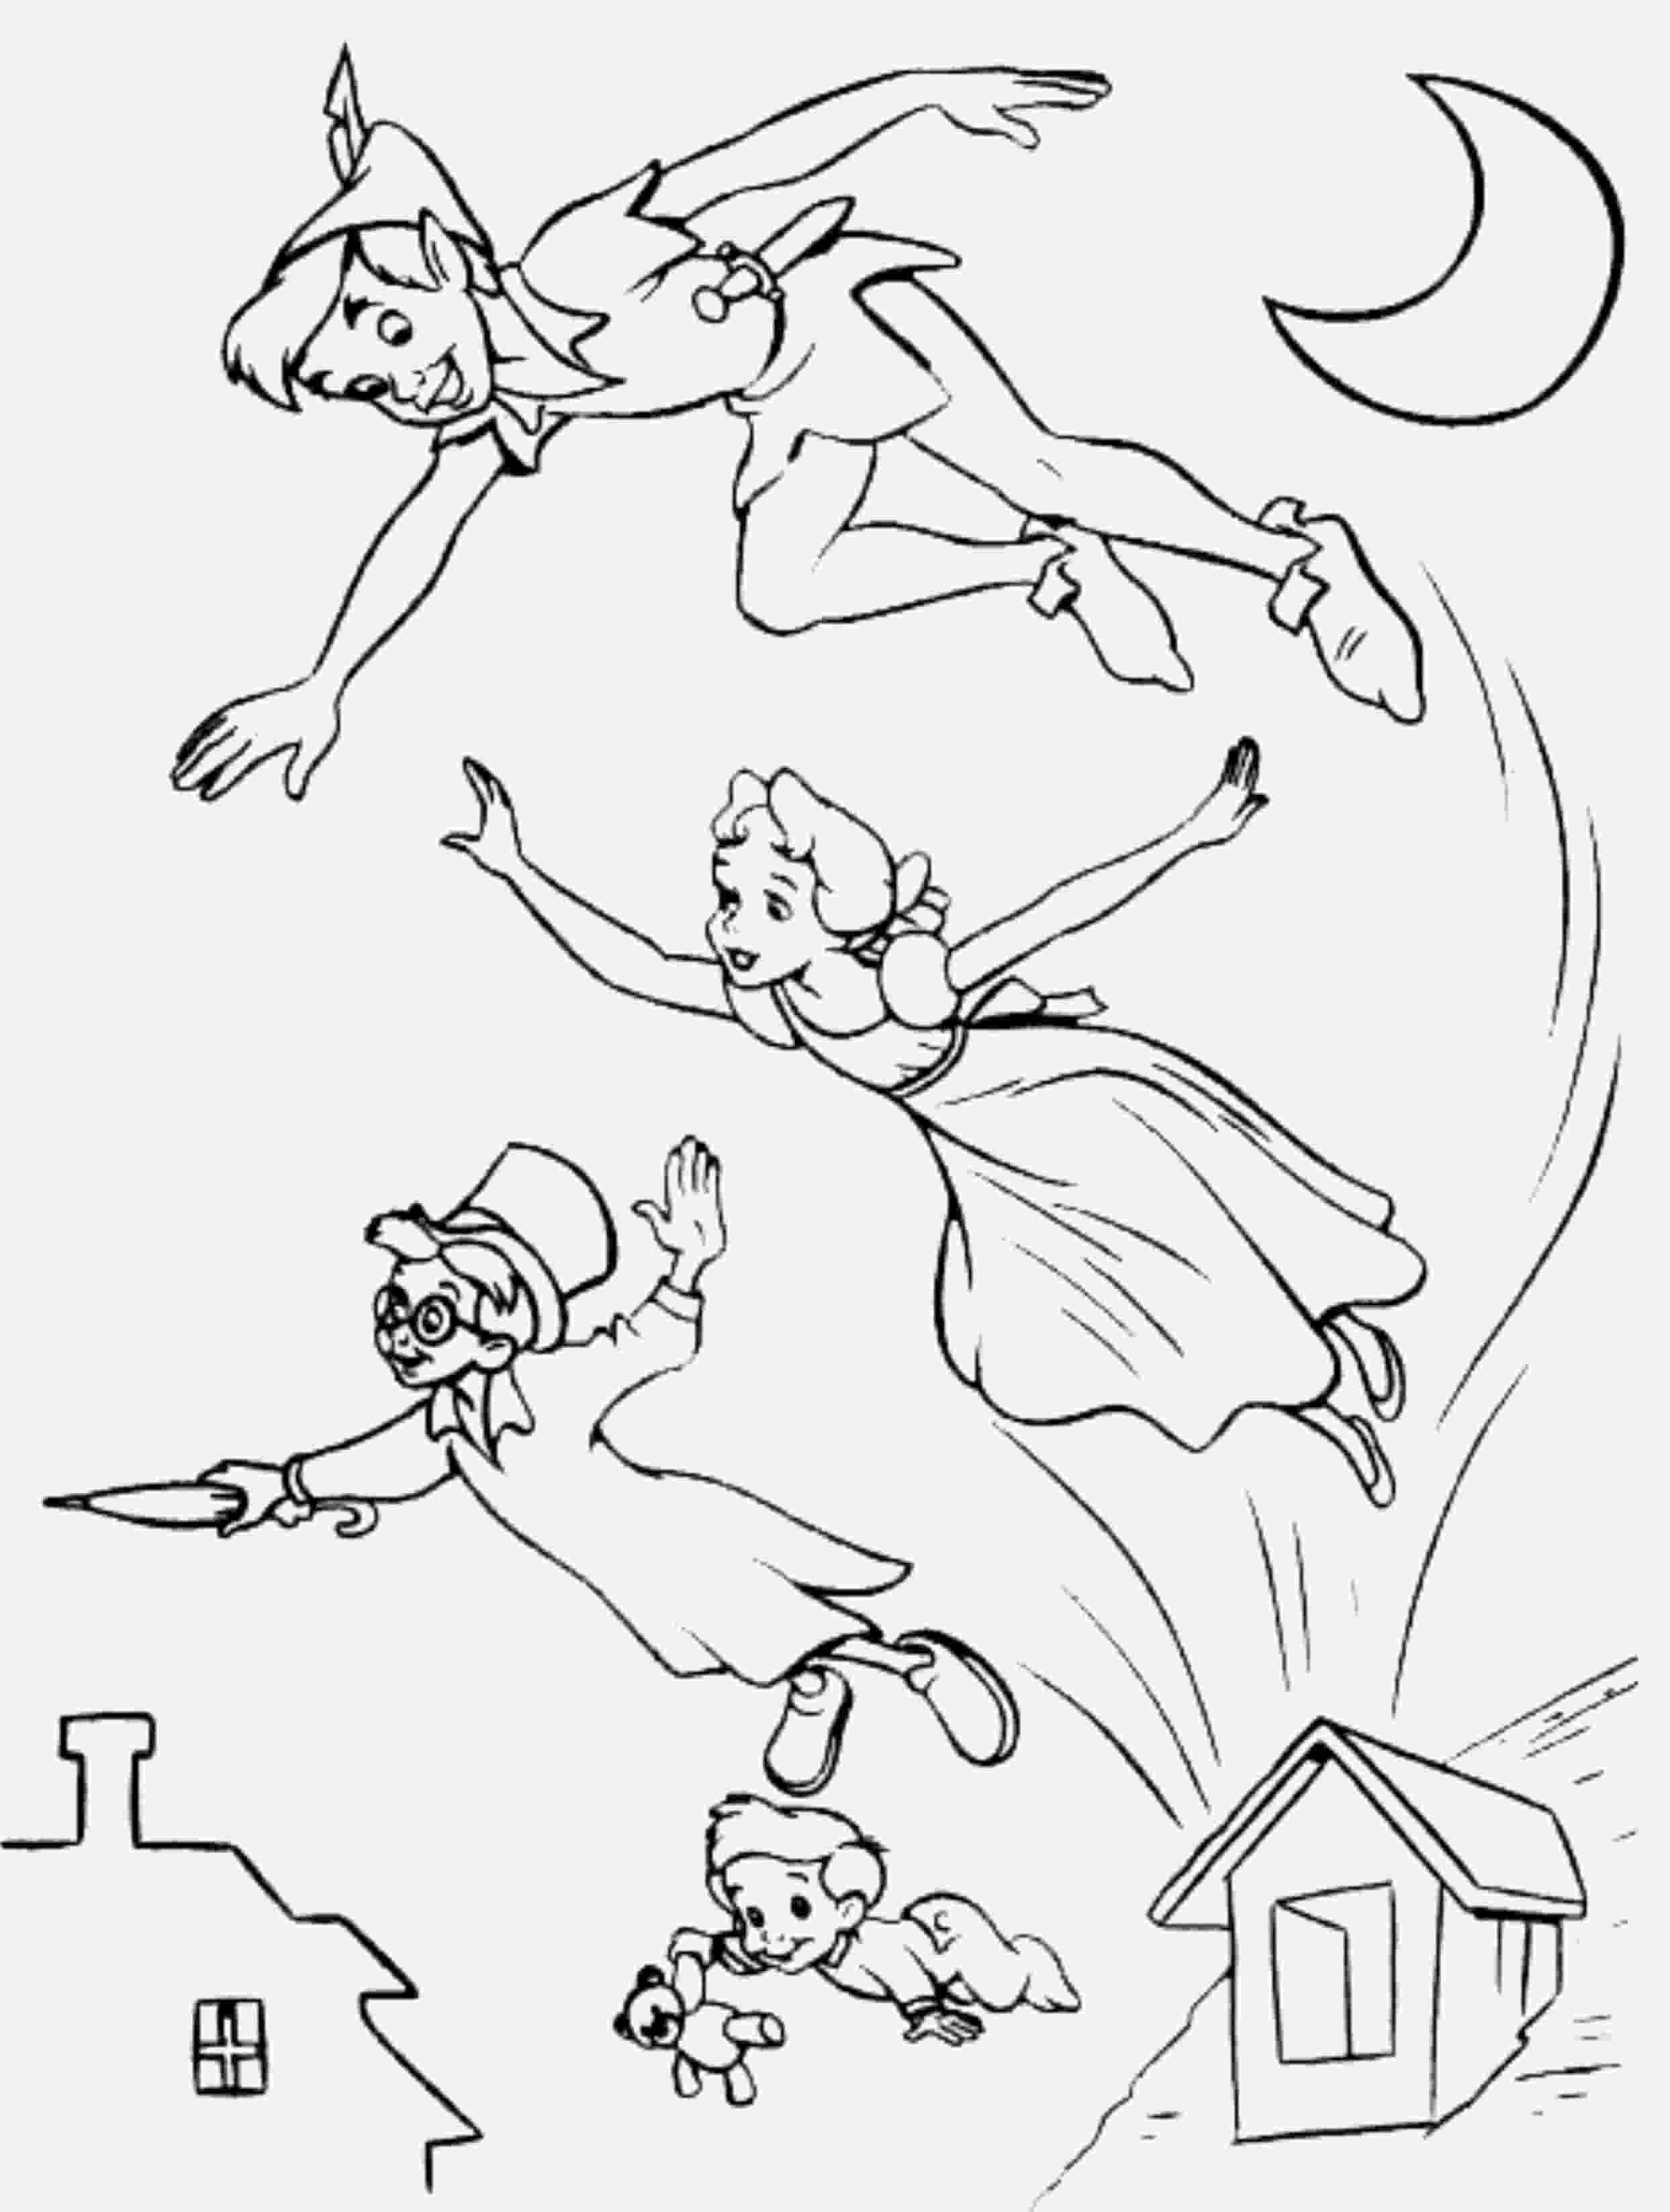 peter pan coloring pages free free printable peter pan coloring pages for kids pan pages free peter coloring 